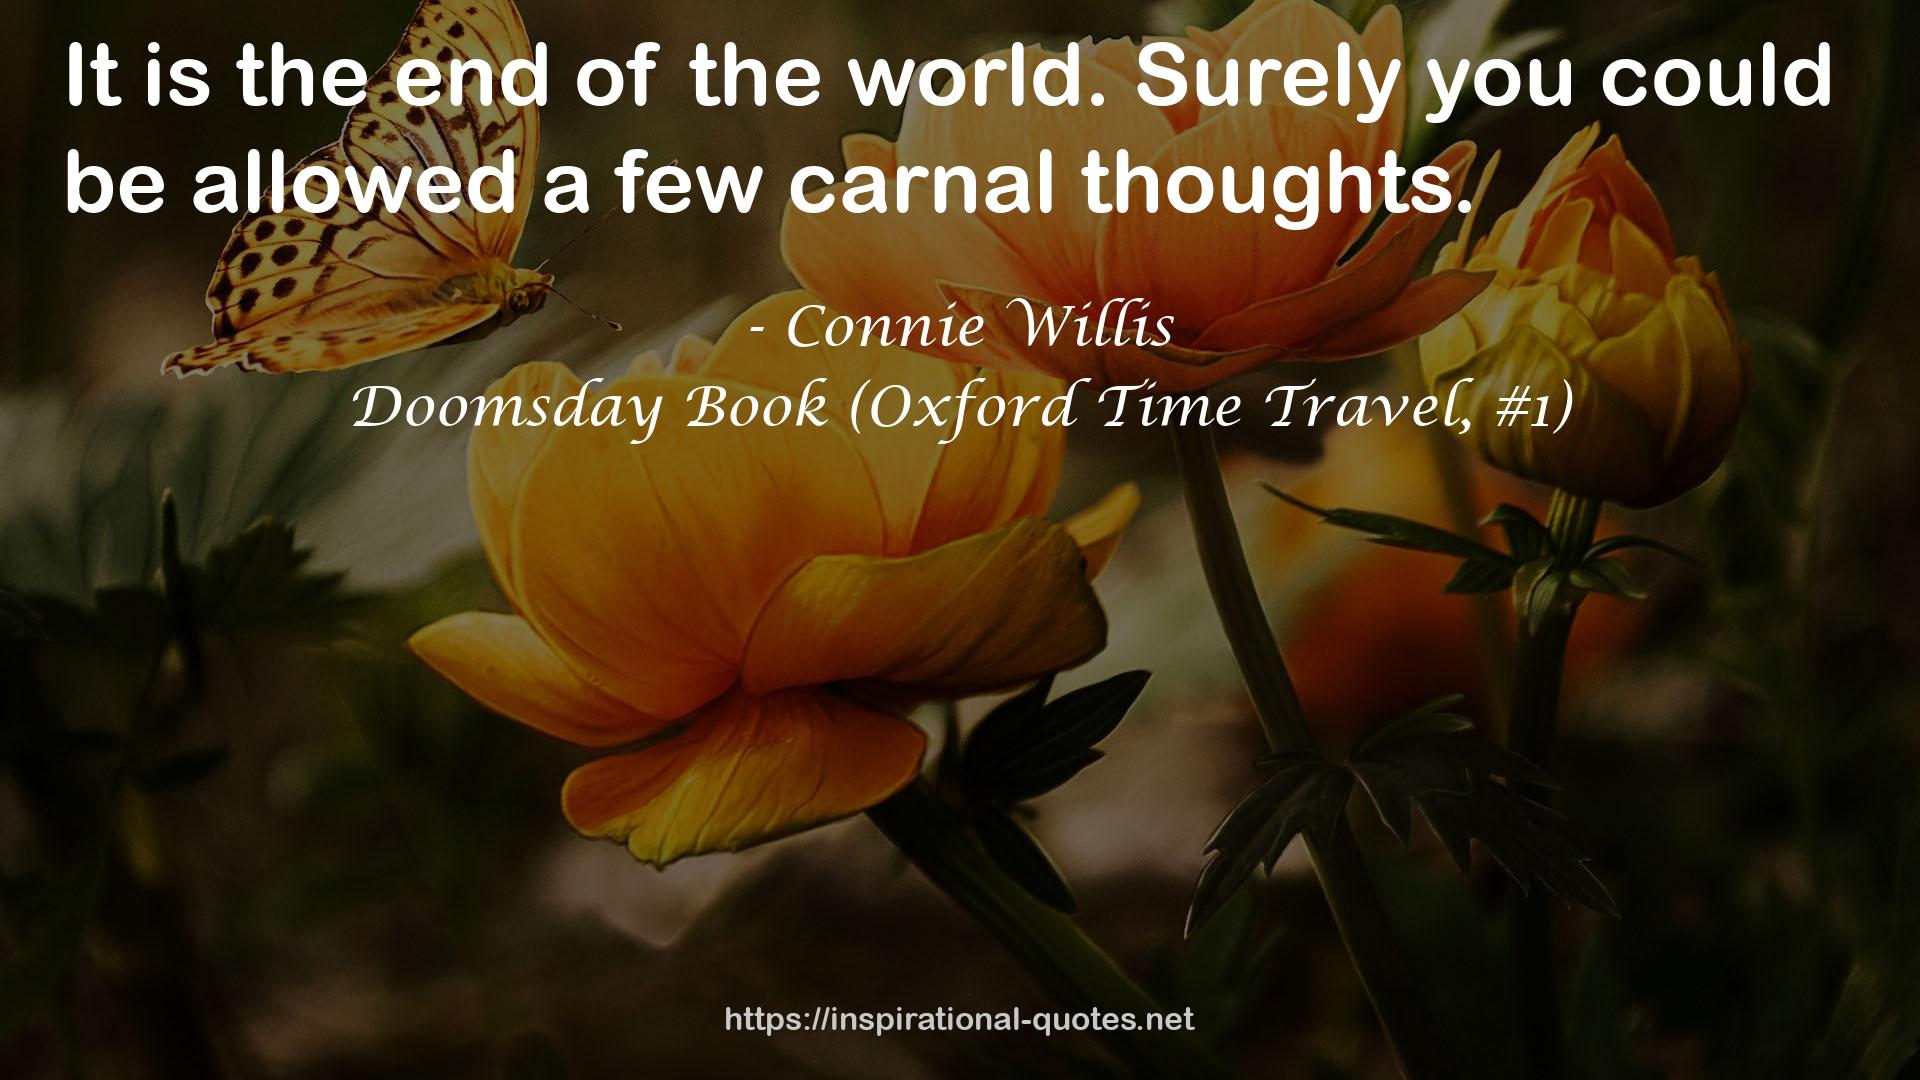 Doomsday Book (Oxford Time Travel, #1) QUOTES